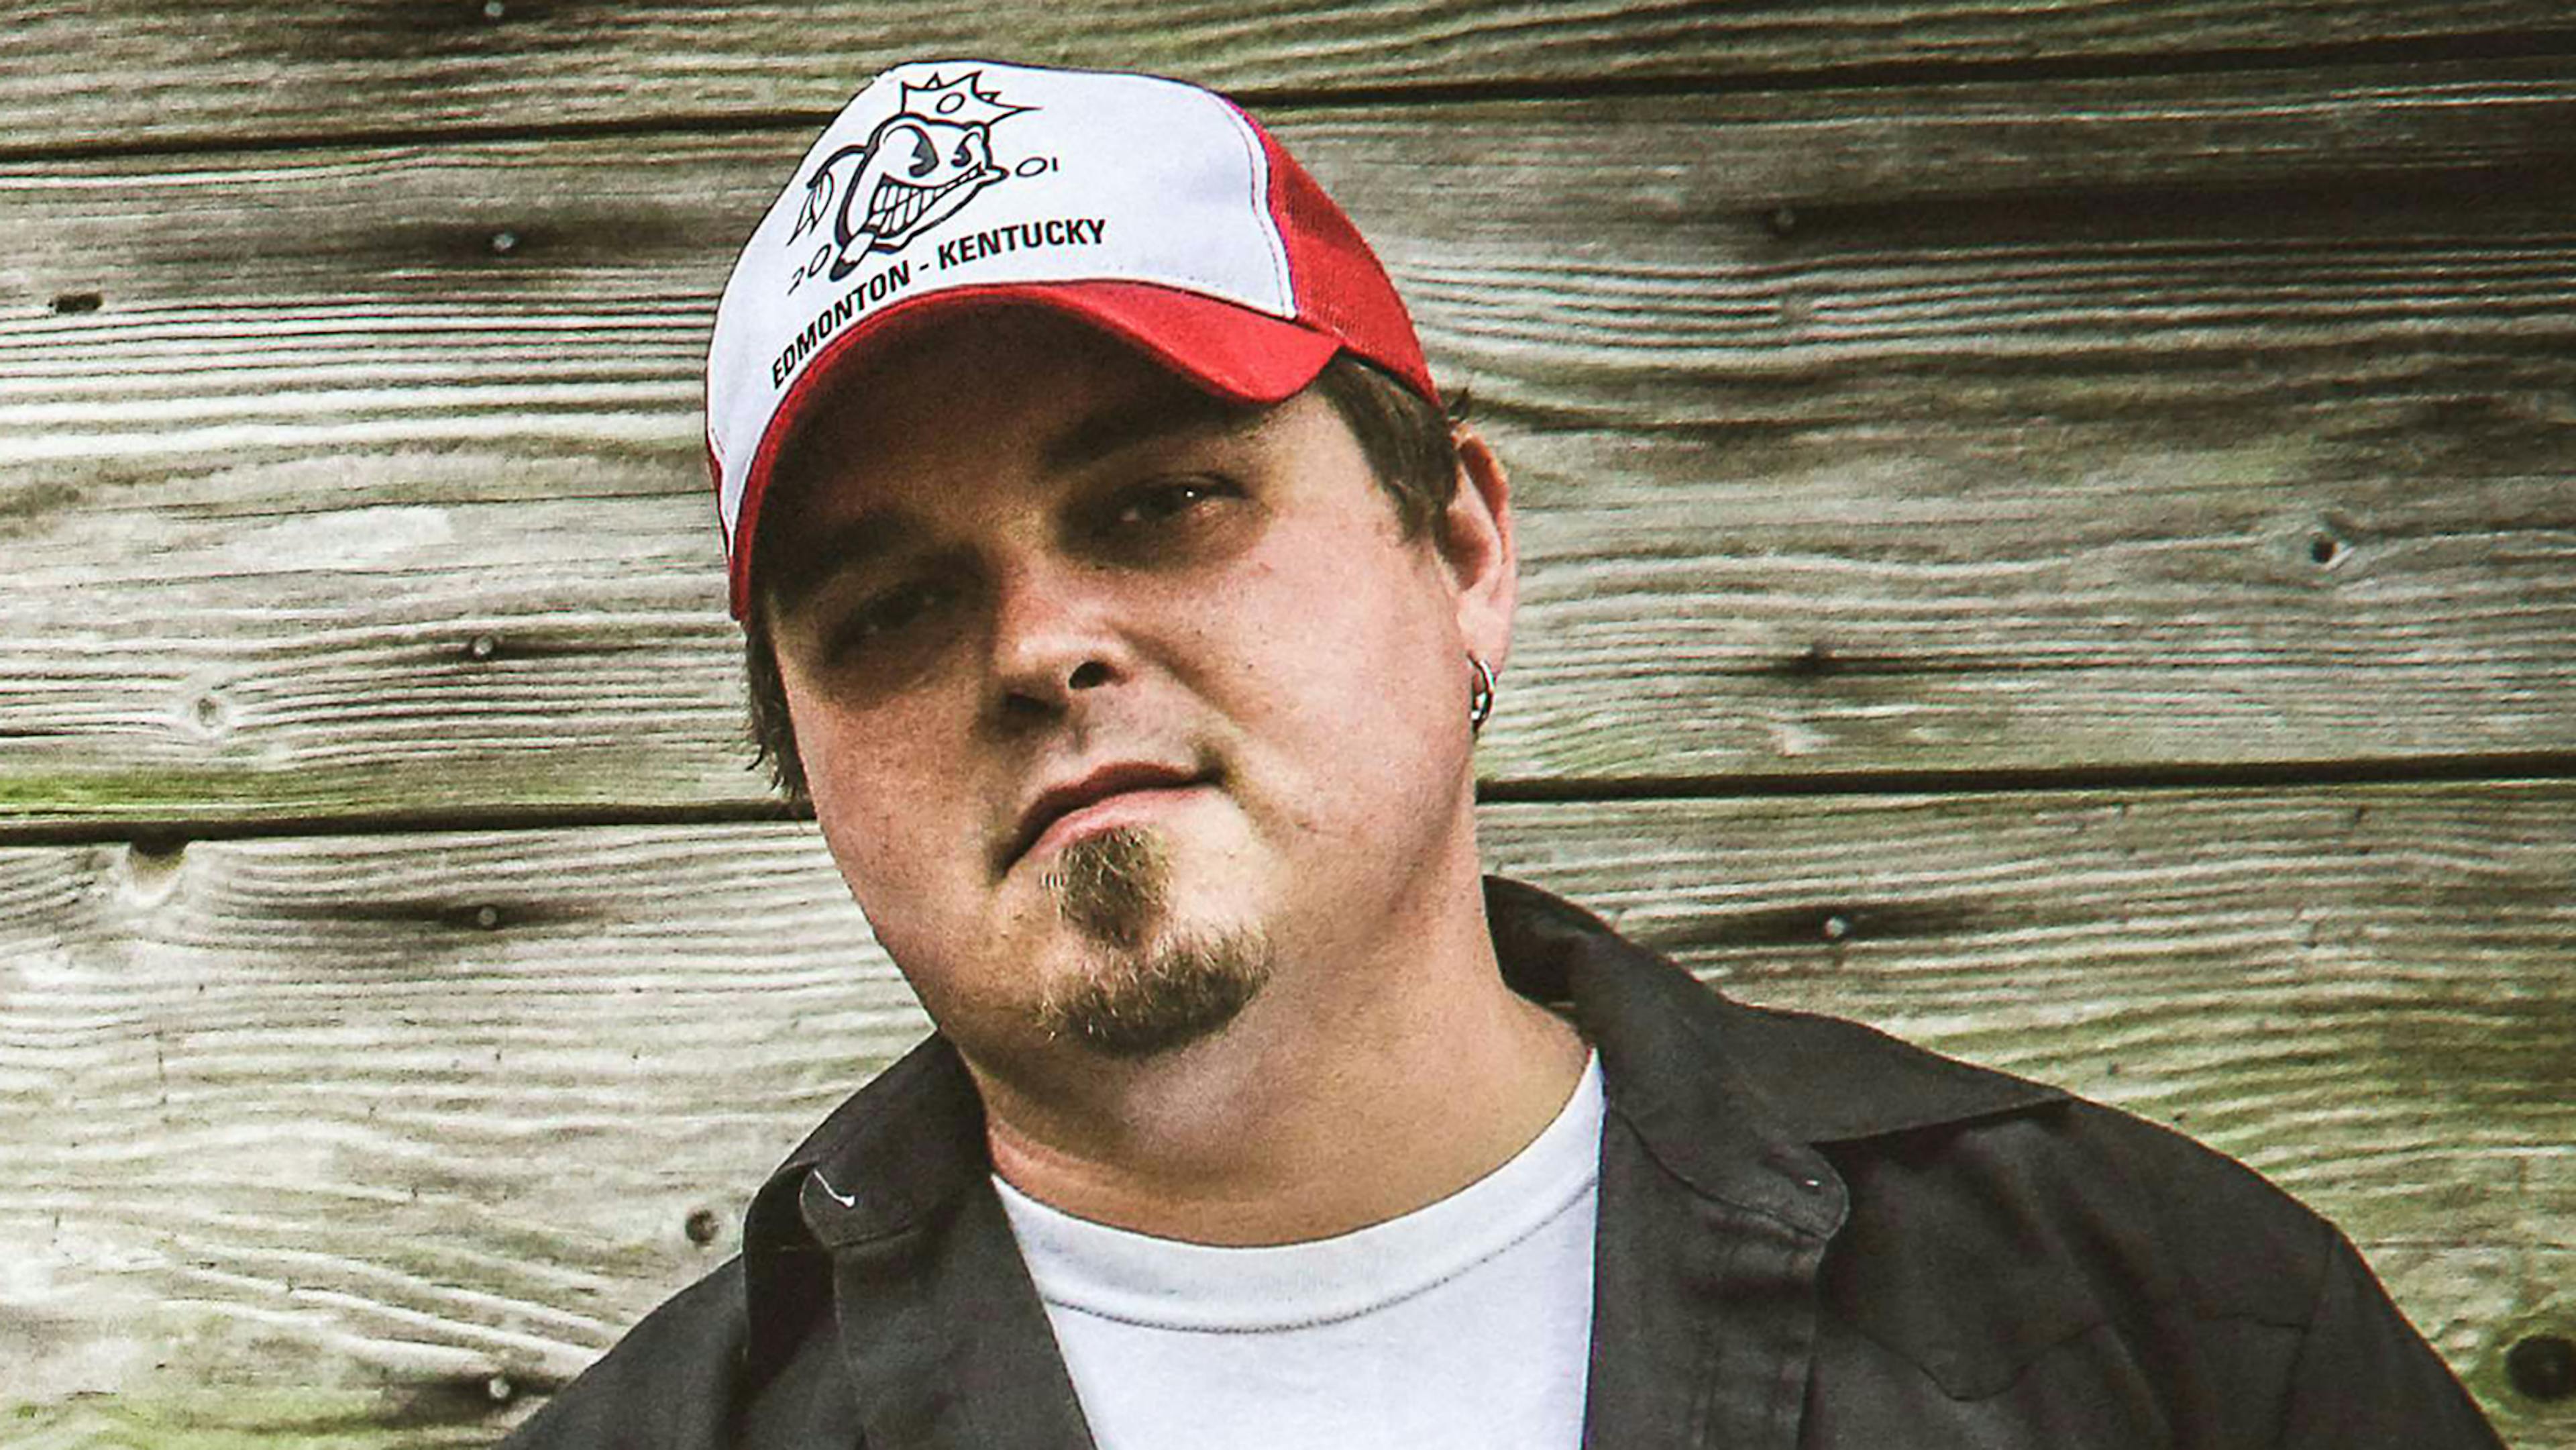 Black Stone Cherry's Chris Robertson: "It's Not Easy To Admit You Have A Mental Health Problem"